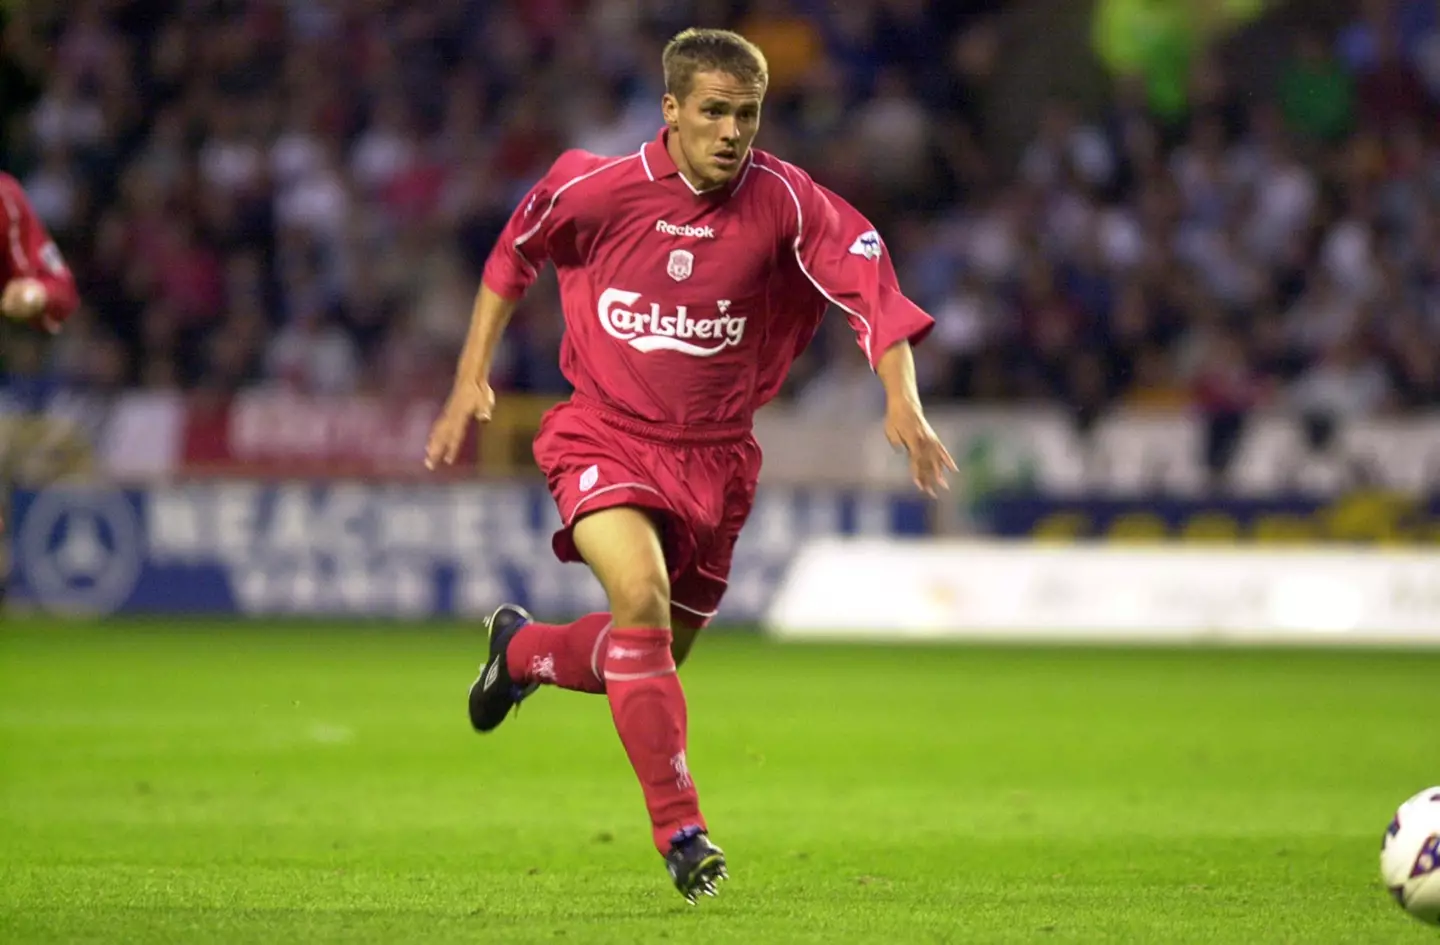 Owen won the Ballon d'Or at just 21 (Image: Alamy)